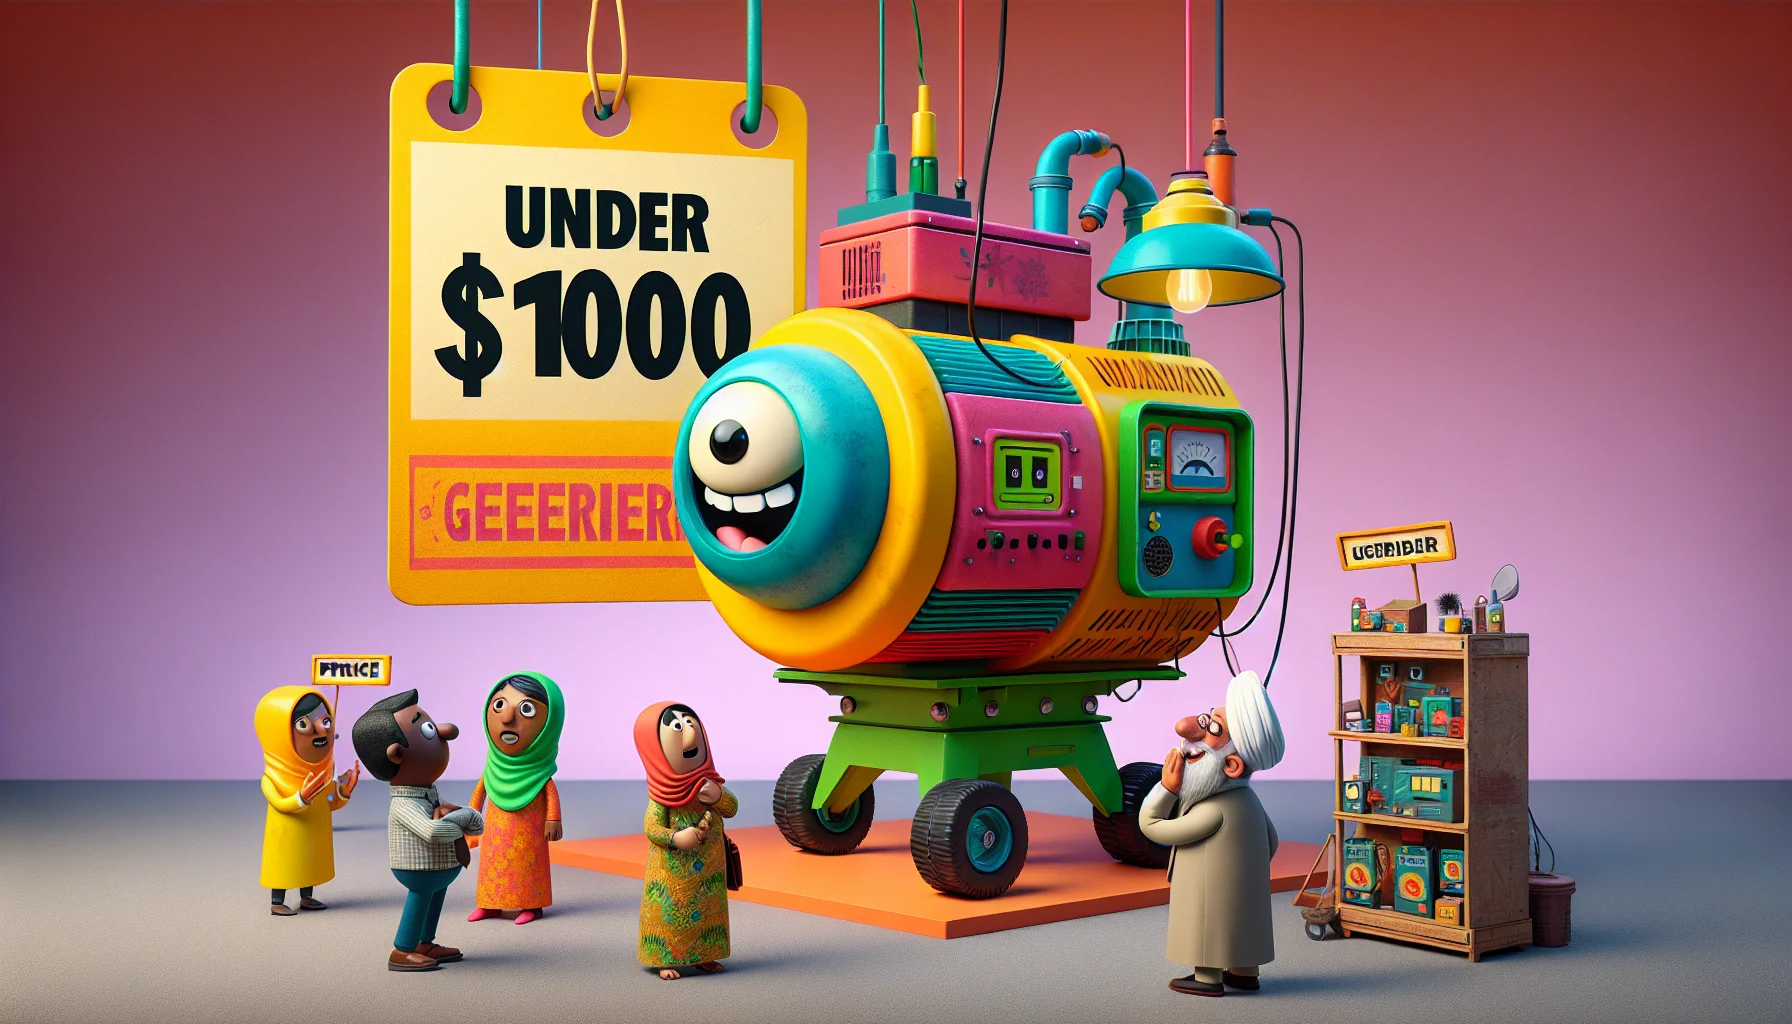 Create an entertaining and realistic scenario where a brightly colored, quirky electricity generator is priced under $1000. This generator is comically large, towering over other items in a whimsical shop setting. Price tag hanging on it boldly displaying the words 'Under $1000'. Engage a diverse group of customers in the scene; an intrigued South Asian woman, a chuckling Middle-Eastern man, and a bemused Caucasian elderly person. This should convey a lighthearted and enticing look at how even the act of generating electricity can be fun and affordable.